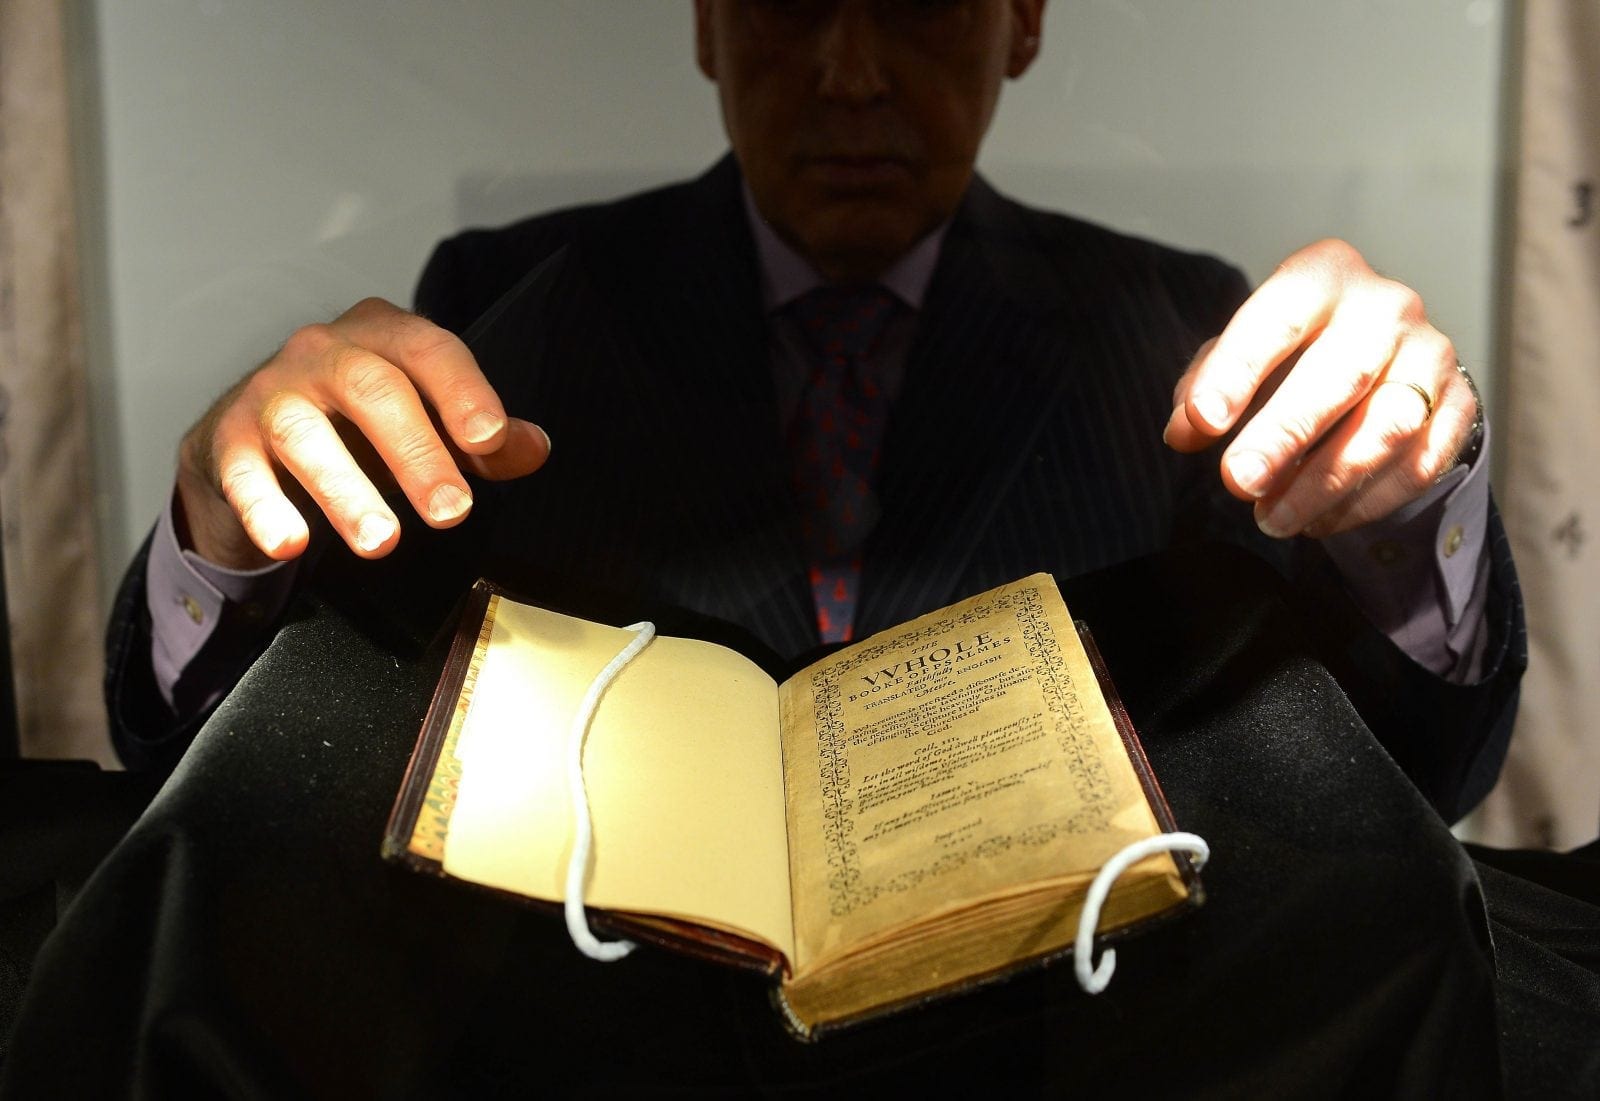 World's most expensive book sells for $14 mn